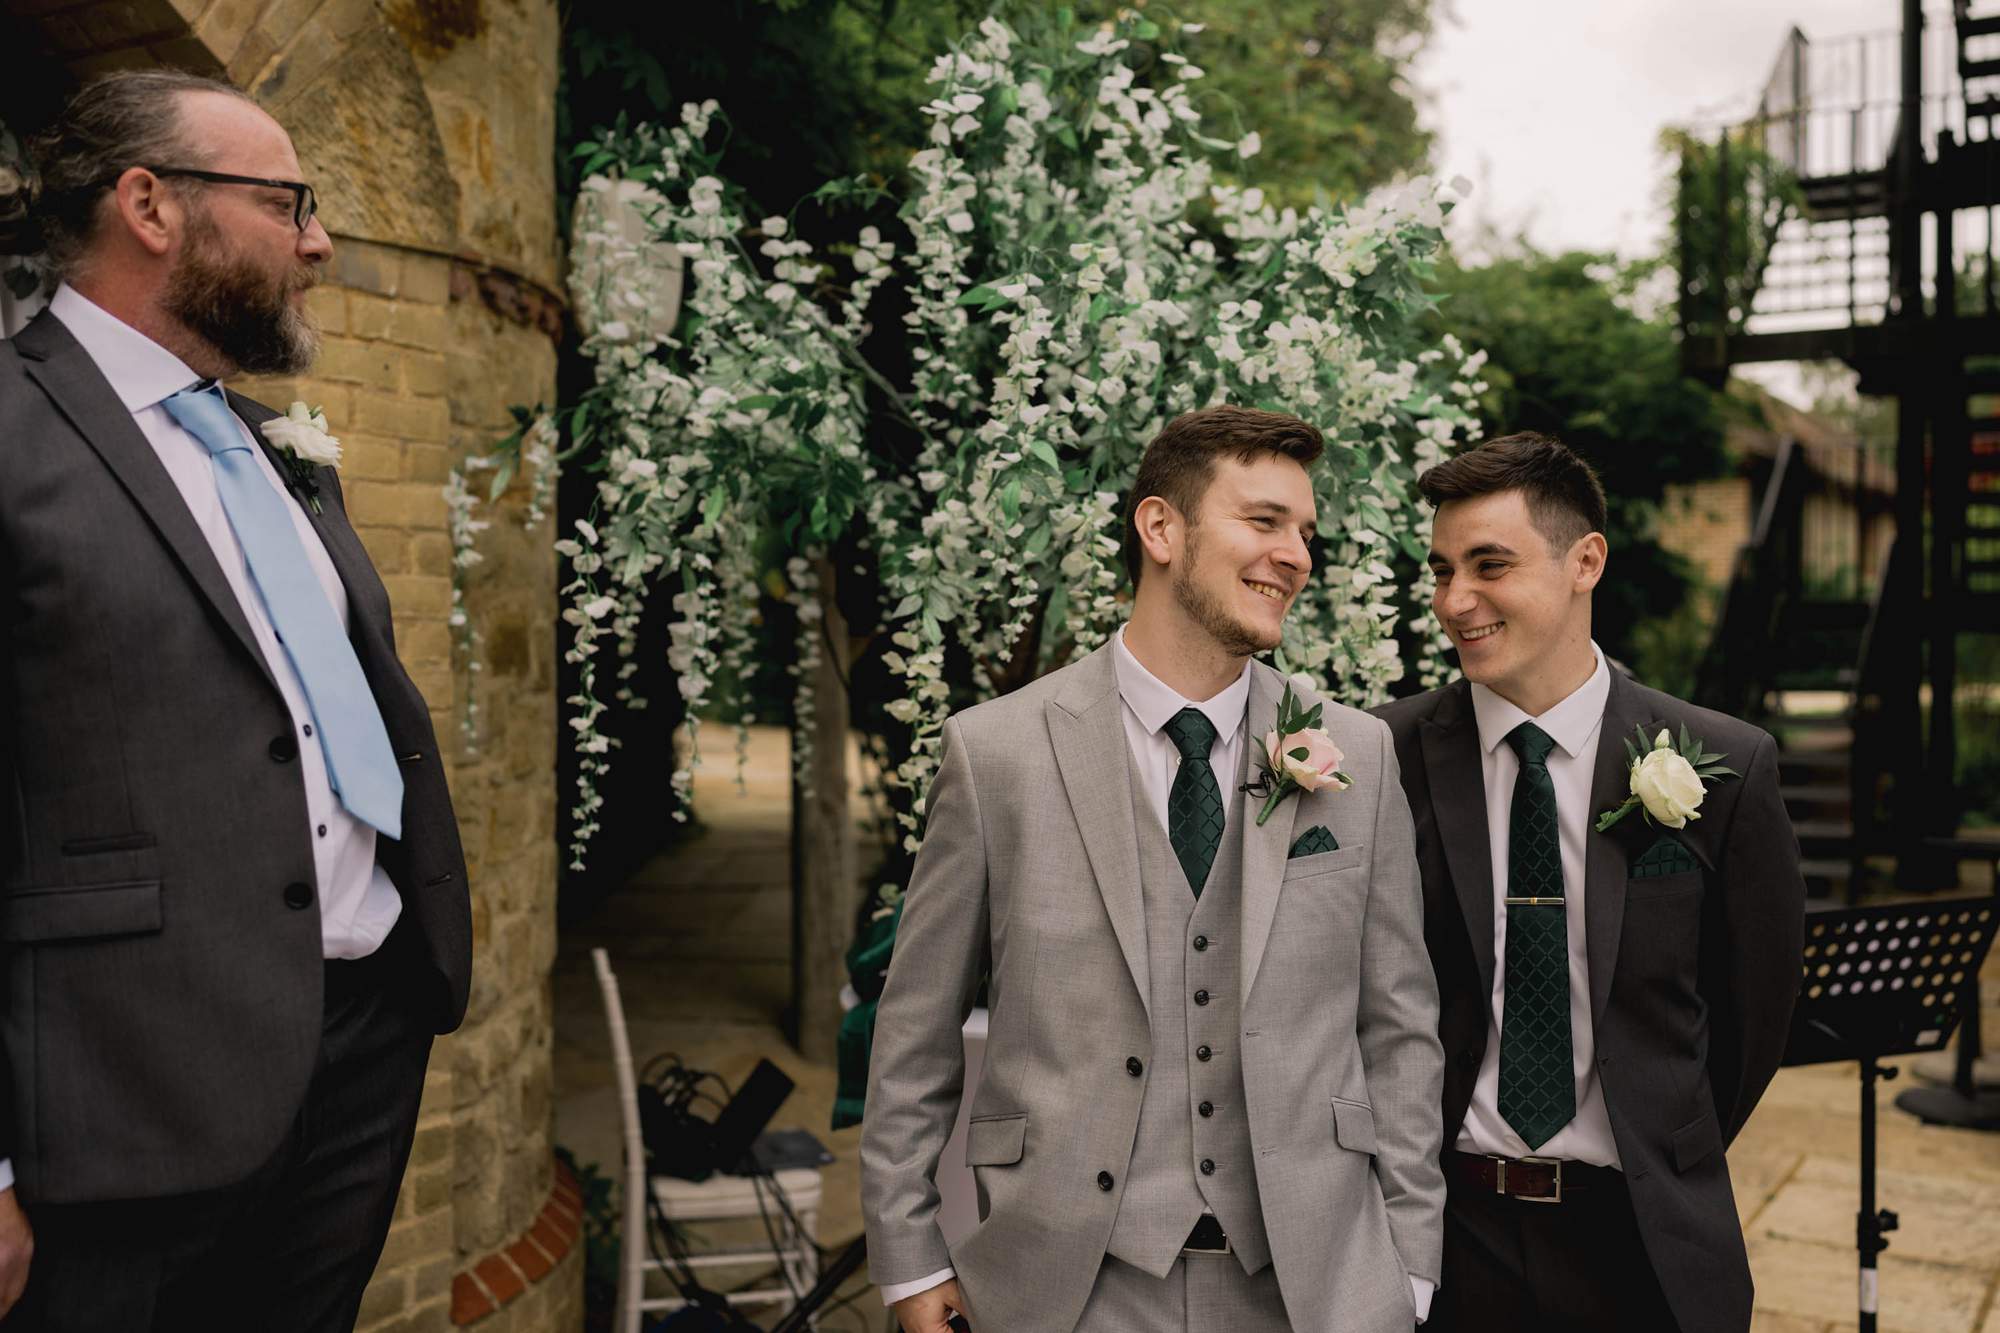 Groomsmen sharing a funny moment before the ceremony at the Ravenswood Hotel in Sussex.